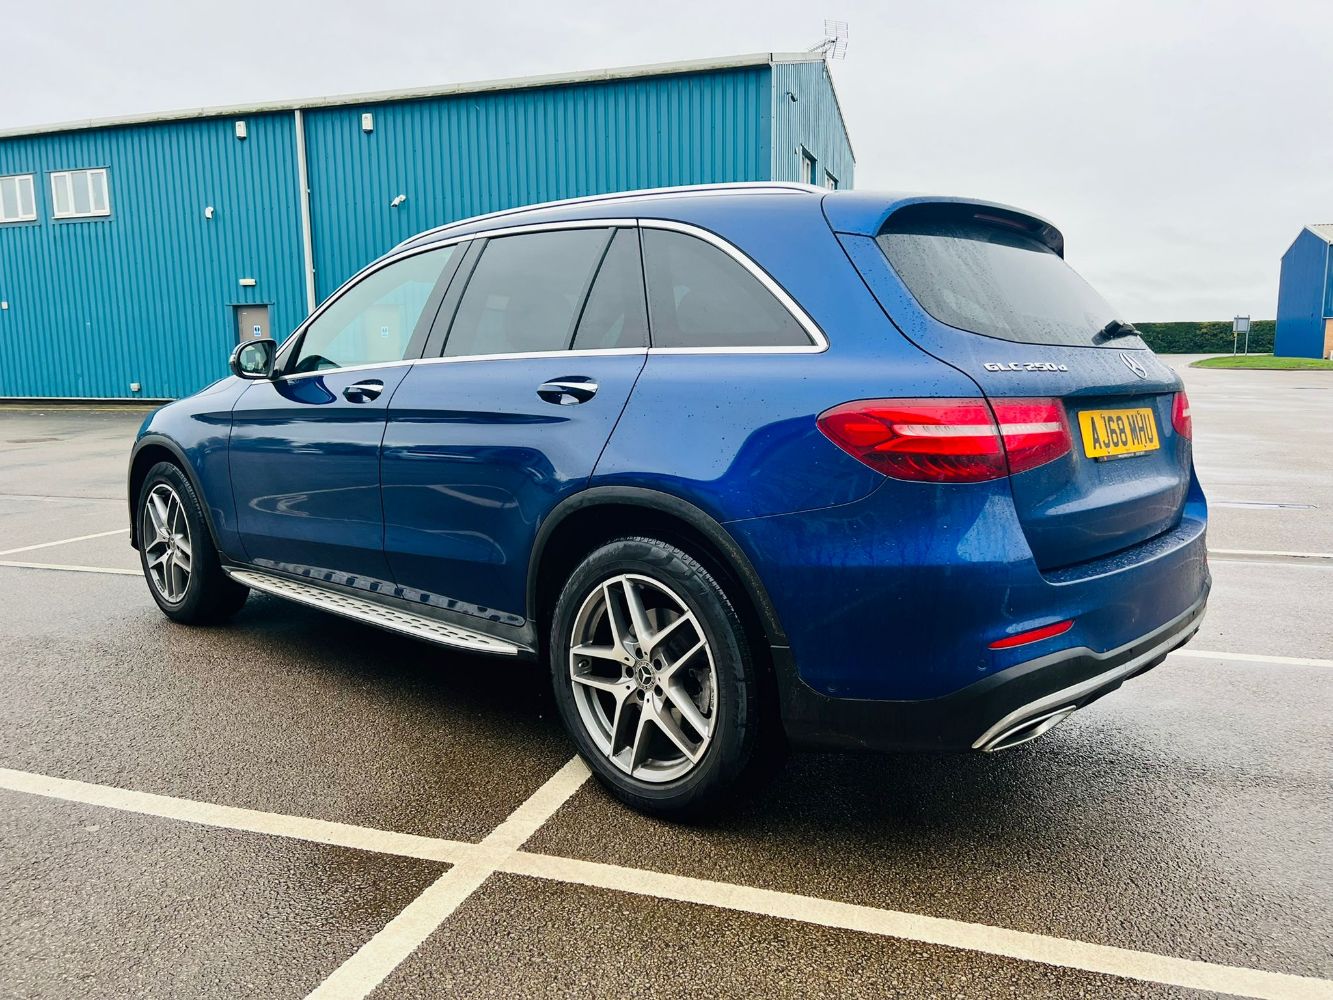 MERCEDES GLC 250D *AMG LINE 68 REG + A LARGE SELECTION OF EURO 6 LONG AND MEDIUM SIZE VANS WITH 1 OWNER AND COMPANY DIRECT